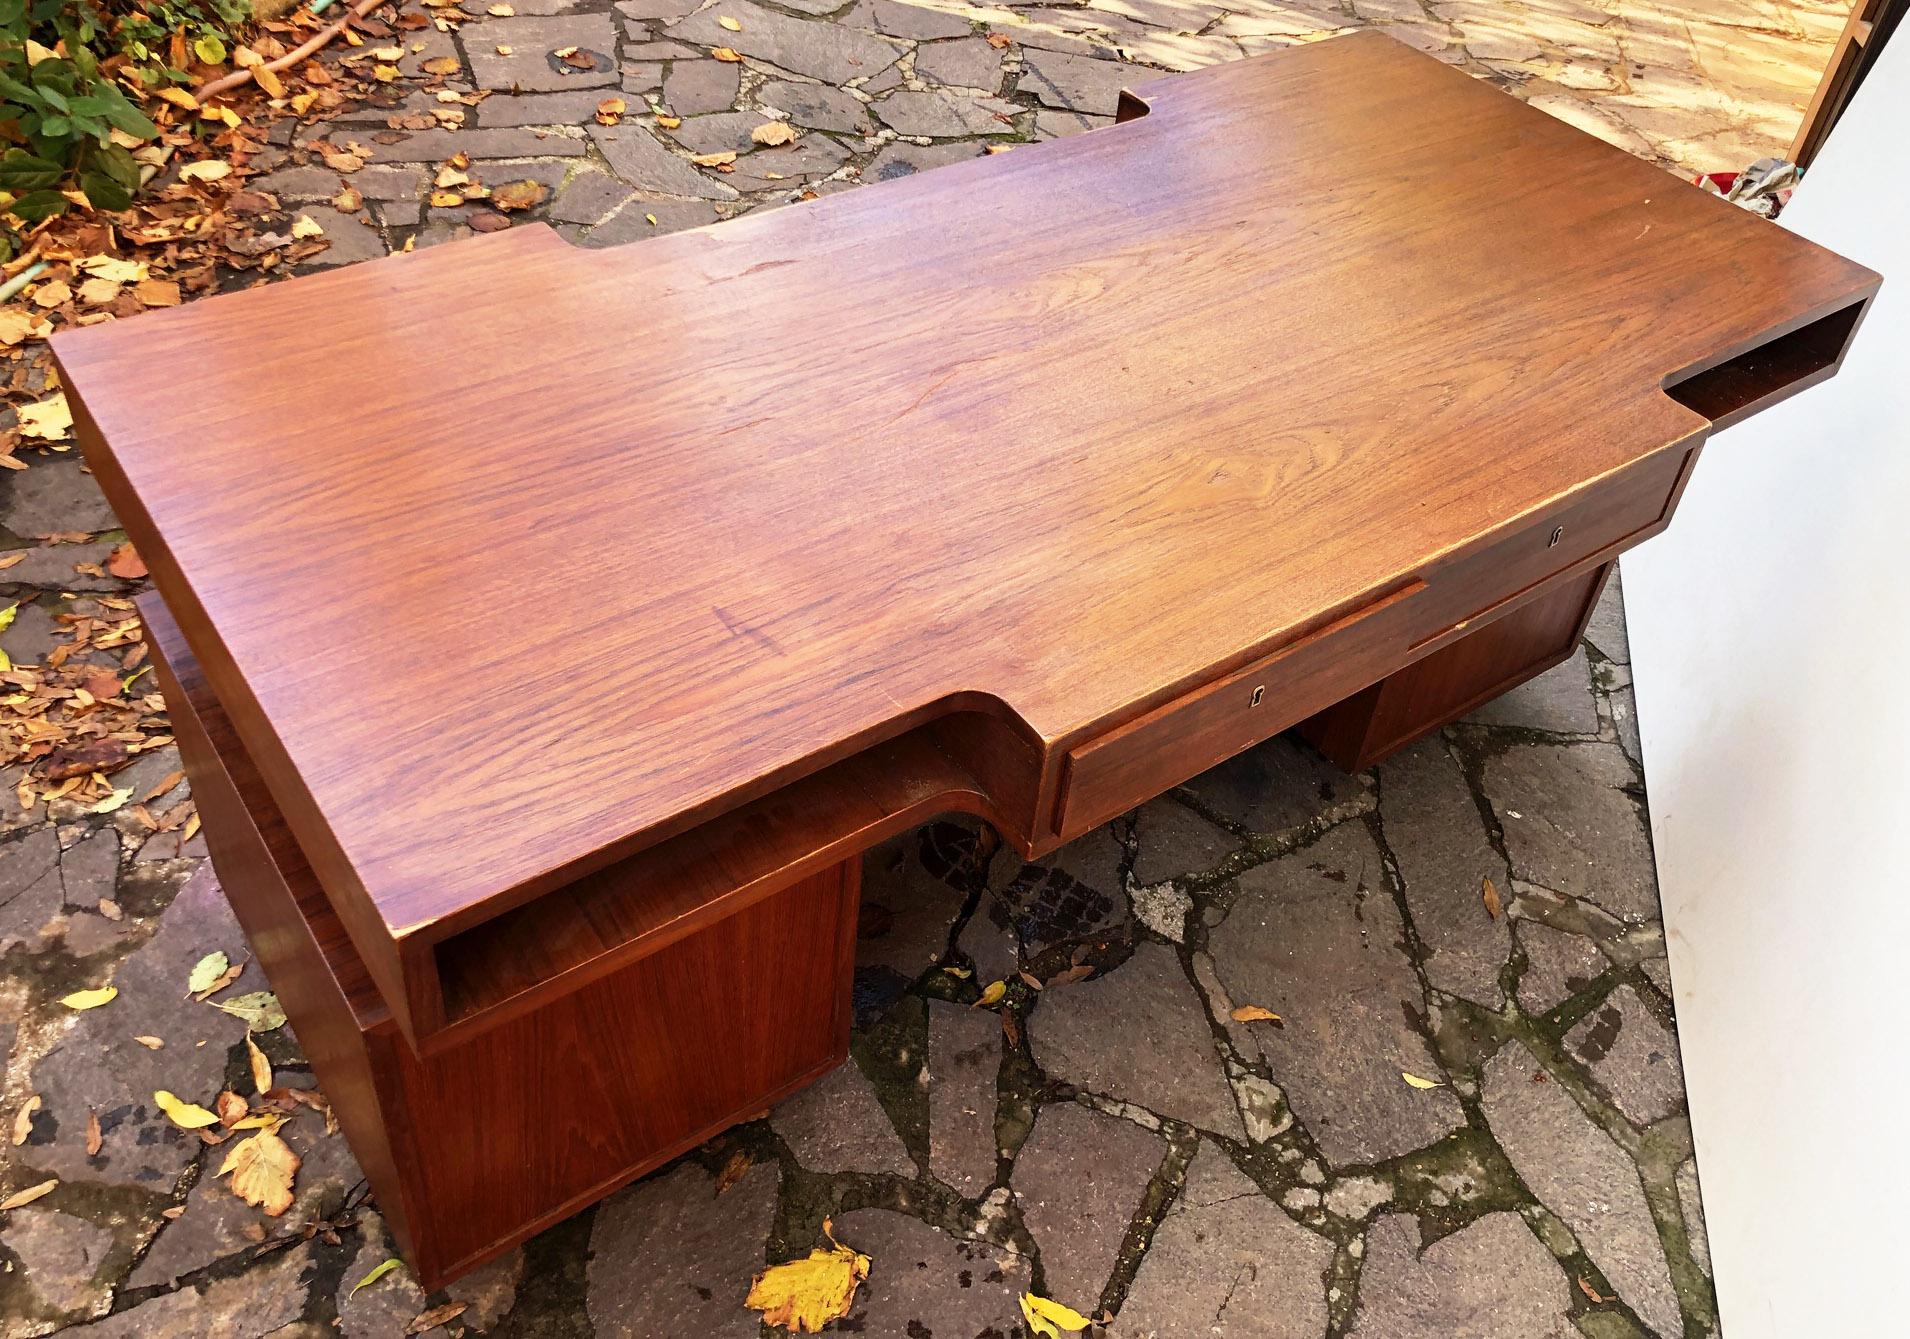 Desk from 1950 with 10 Drawers, Italian Design, Original 2